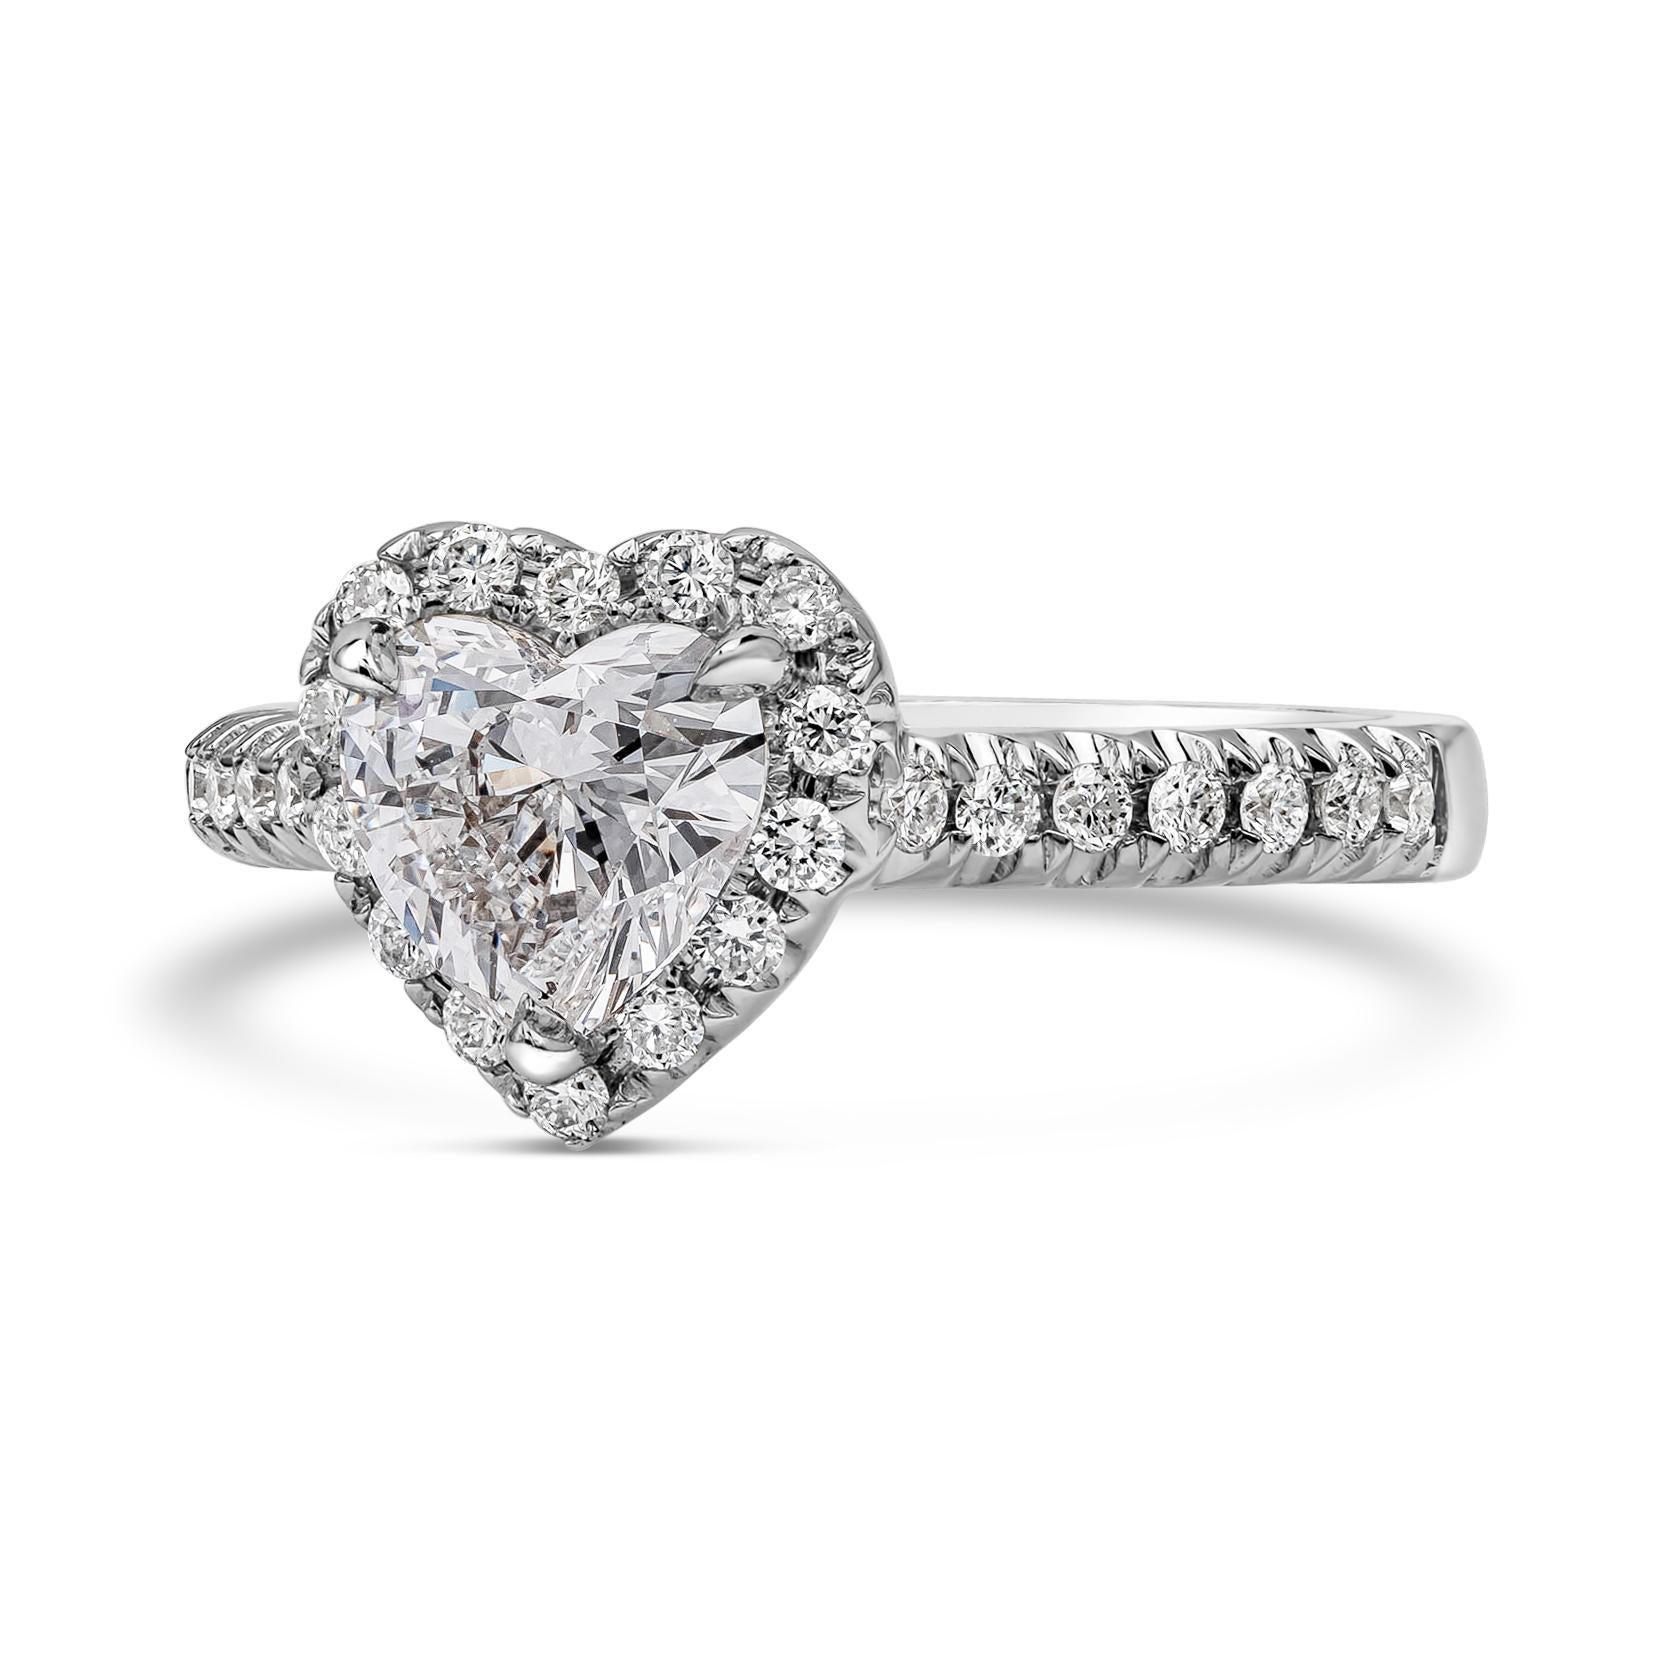 Features a 1.07 carats heart shape diamond certified by GIA as D color and SI1 in clarity. Surrounding the center diamond is a single row of round brilliant diamonds, set in a 18K white gold mounting. Accent diamonds weigh 0.34 carats total. Size